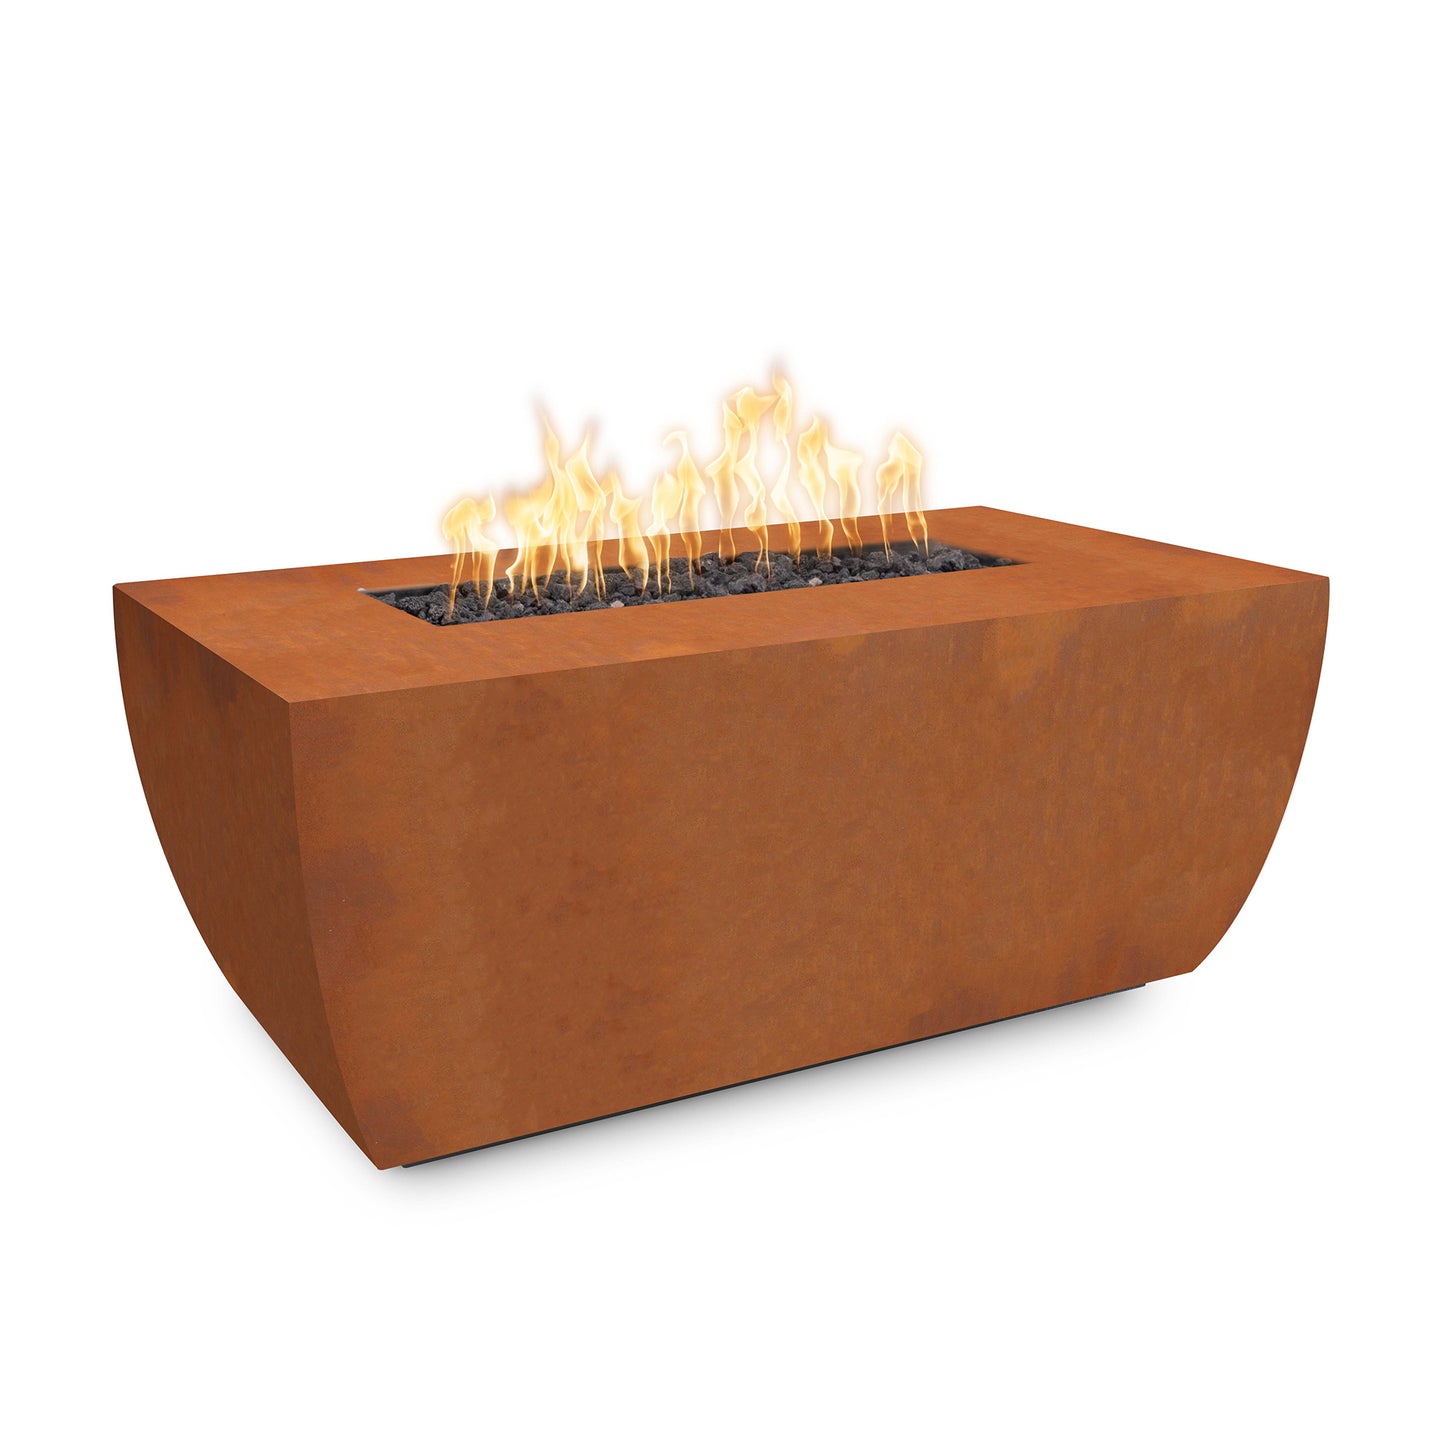 Avalon Metal Fire Pits 48" - 15" Tall - Electronic Ignition